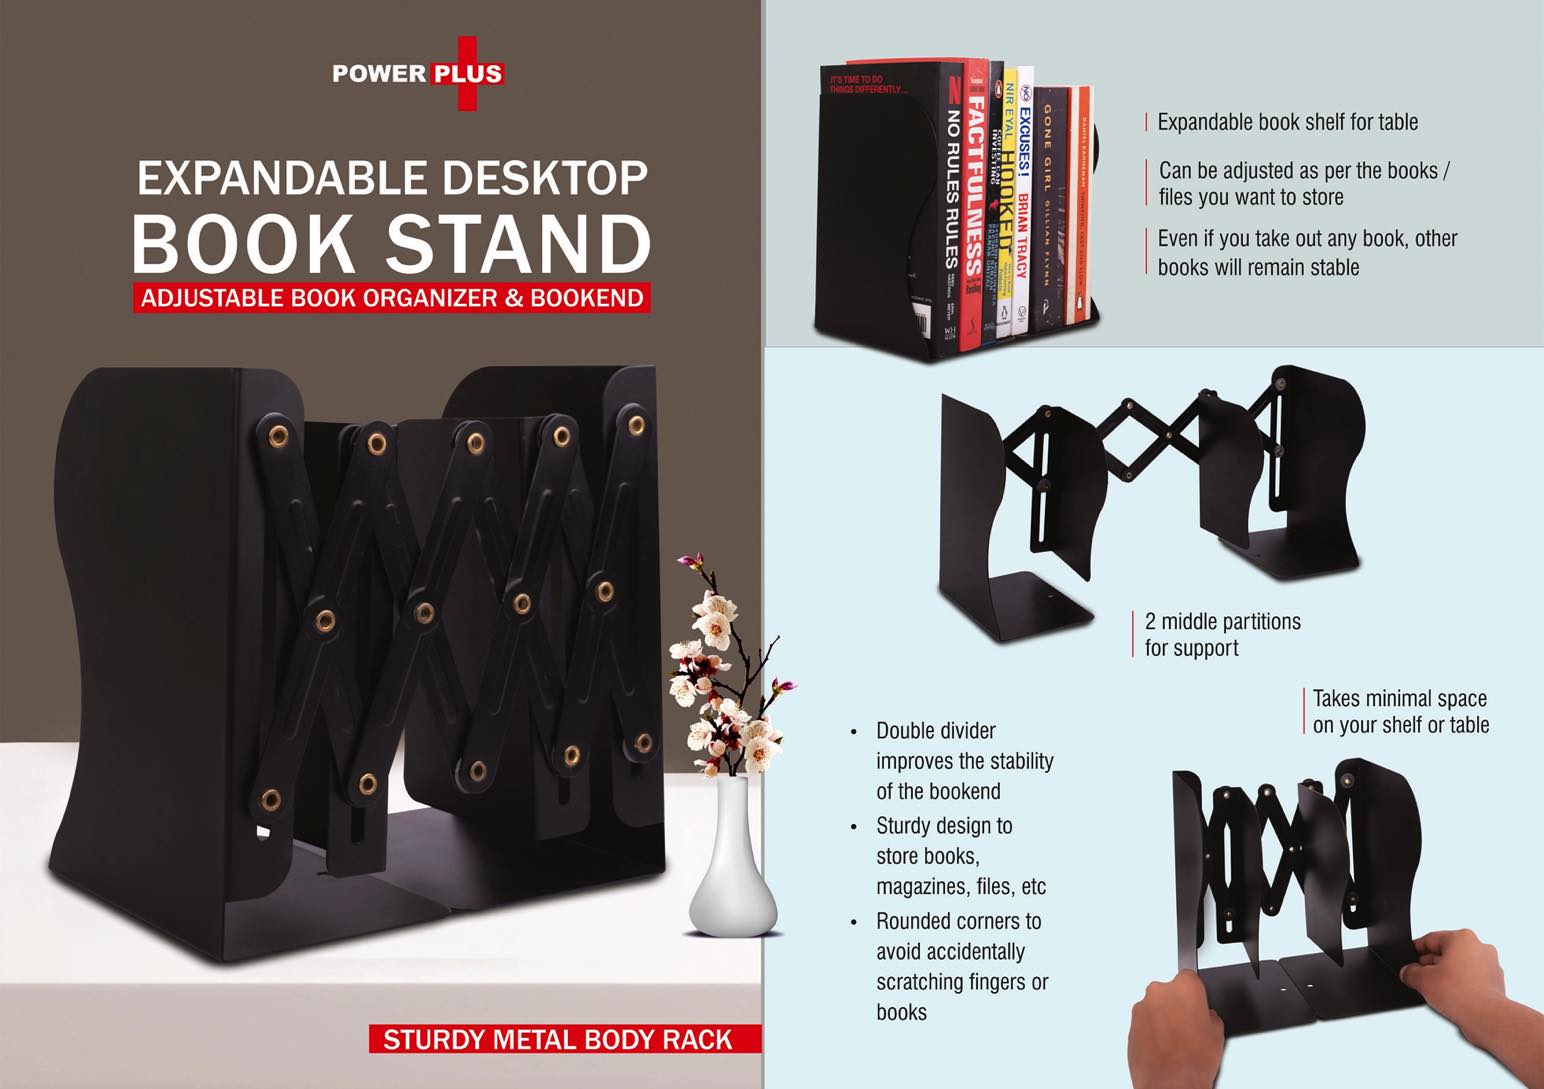 Expandable Desktop Book Stand | Adjustable Book Organizer & Bookend | Sturdy Metal Body Rack | 2 Middle Partitions For Support